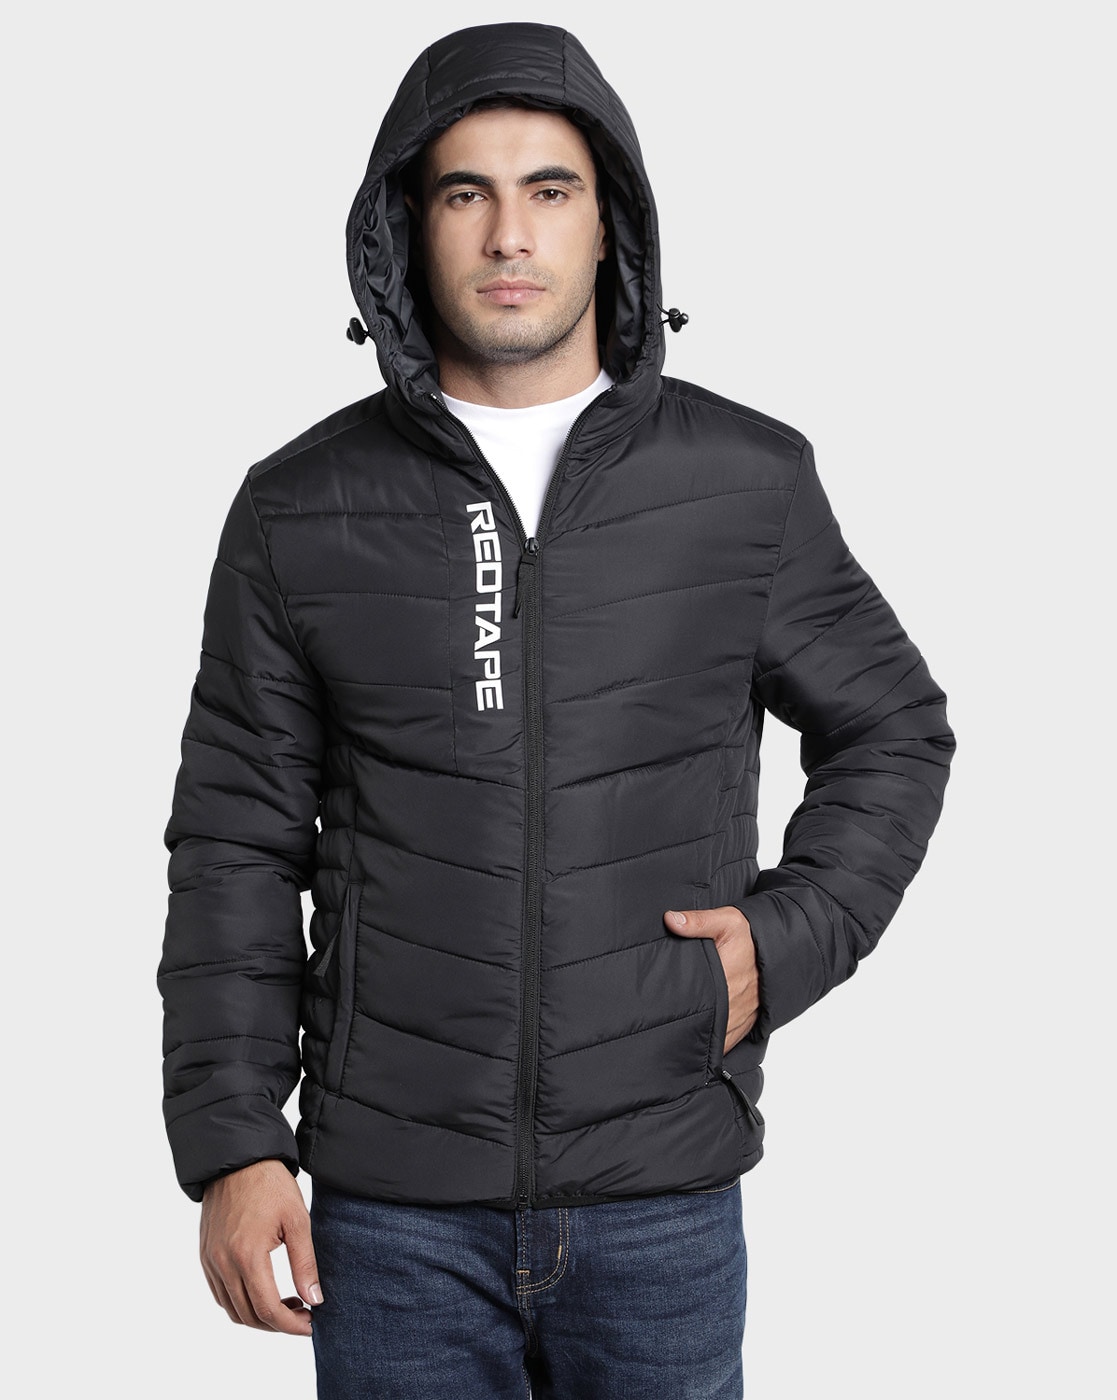 Buy Red Tape Men's Olive Solid Padded Jacket_RFJ0186-M at Amazon.in